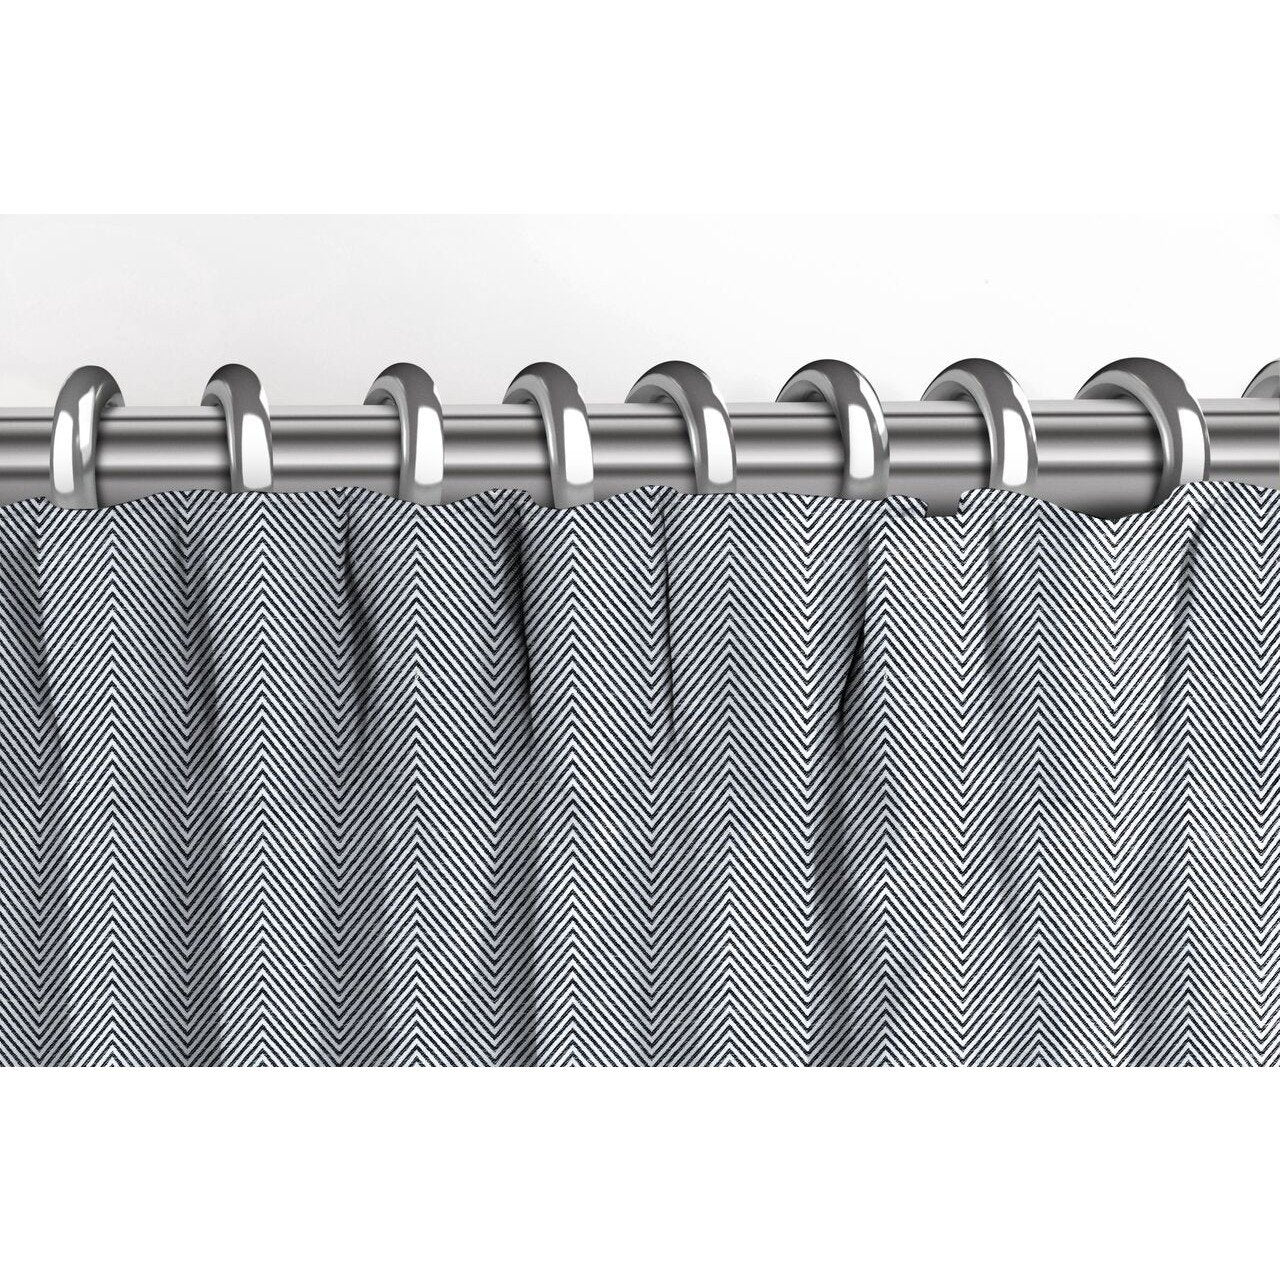 McAlister Textiles Herringbone Twill Black + White Curtains Tailored Curtains 